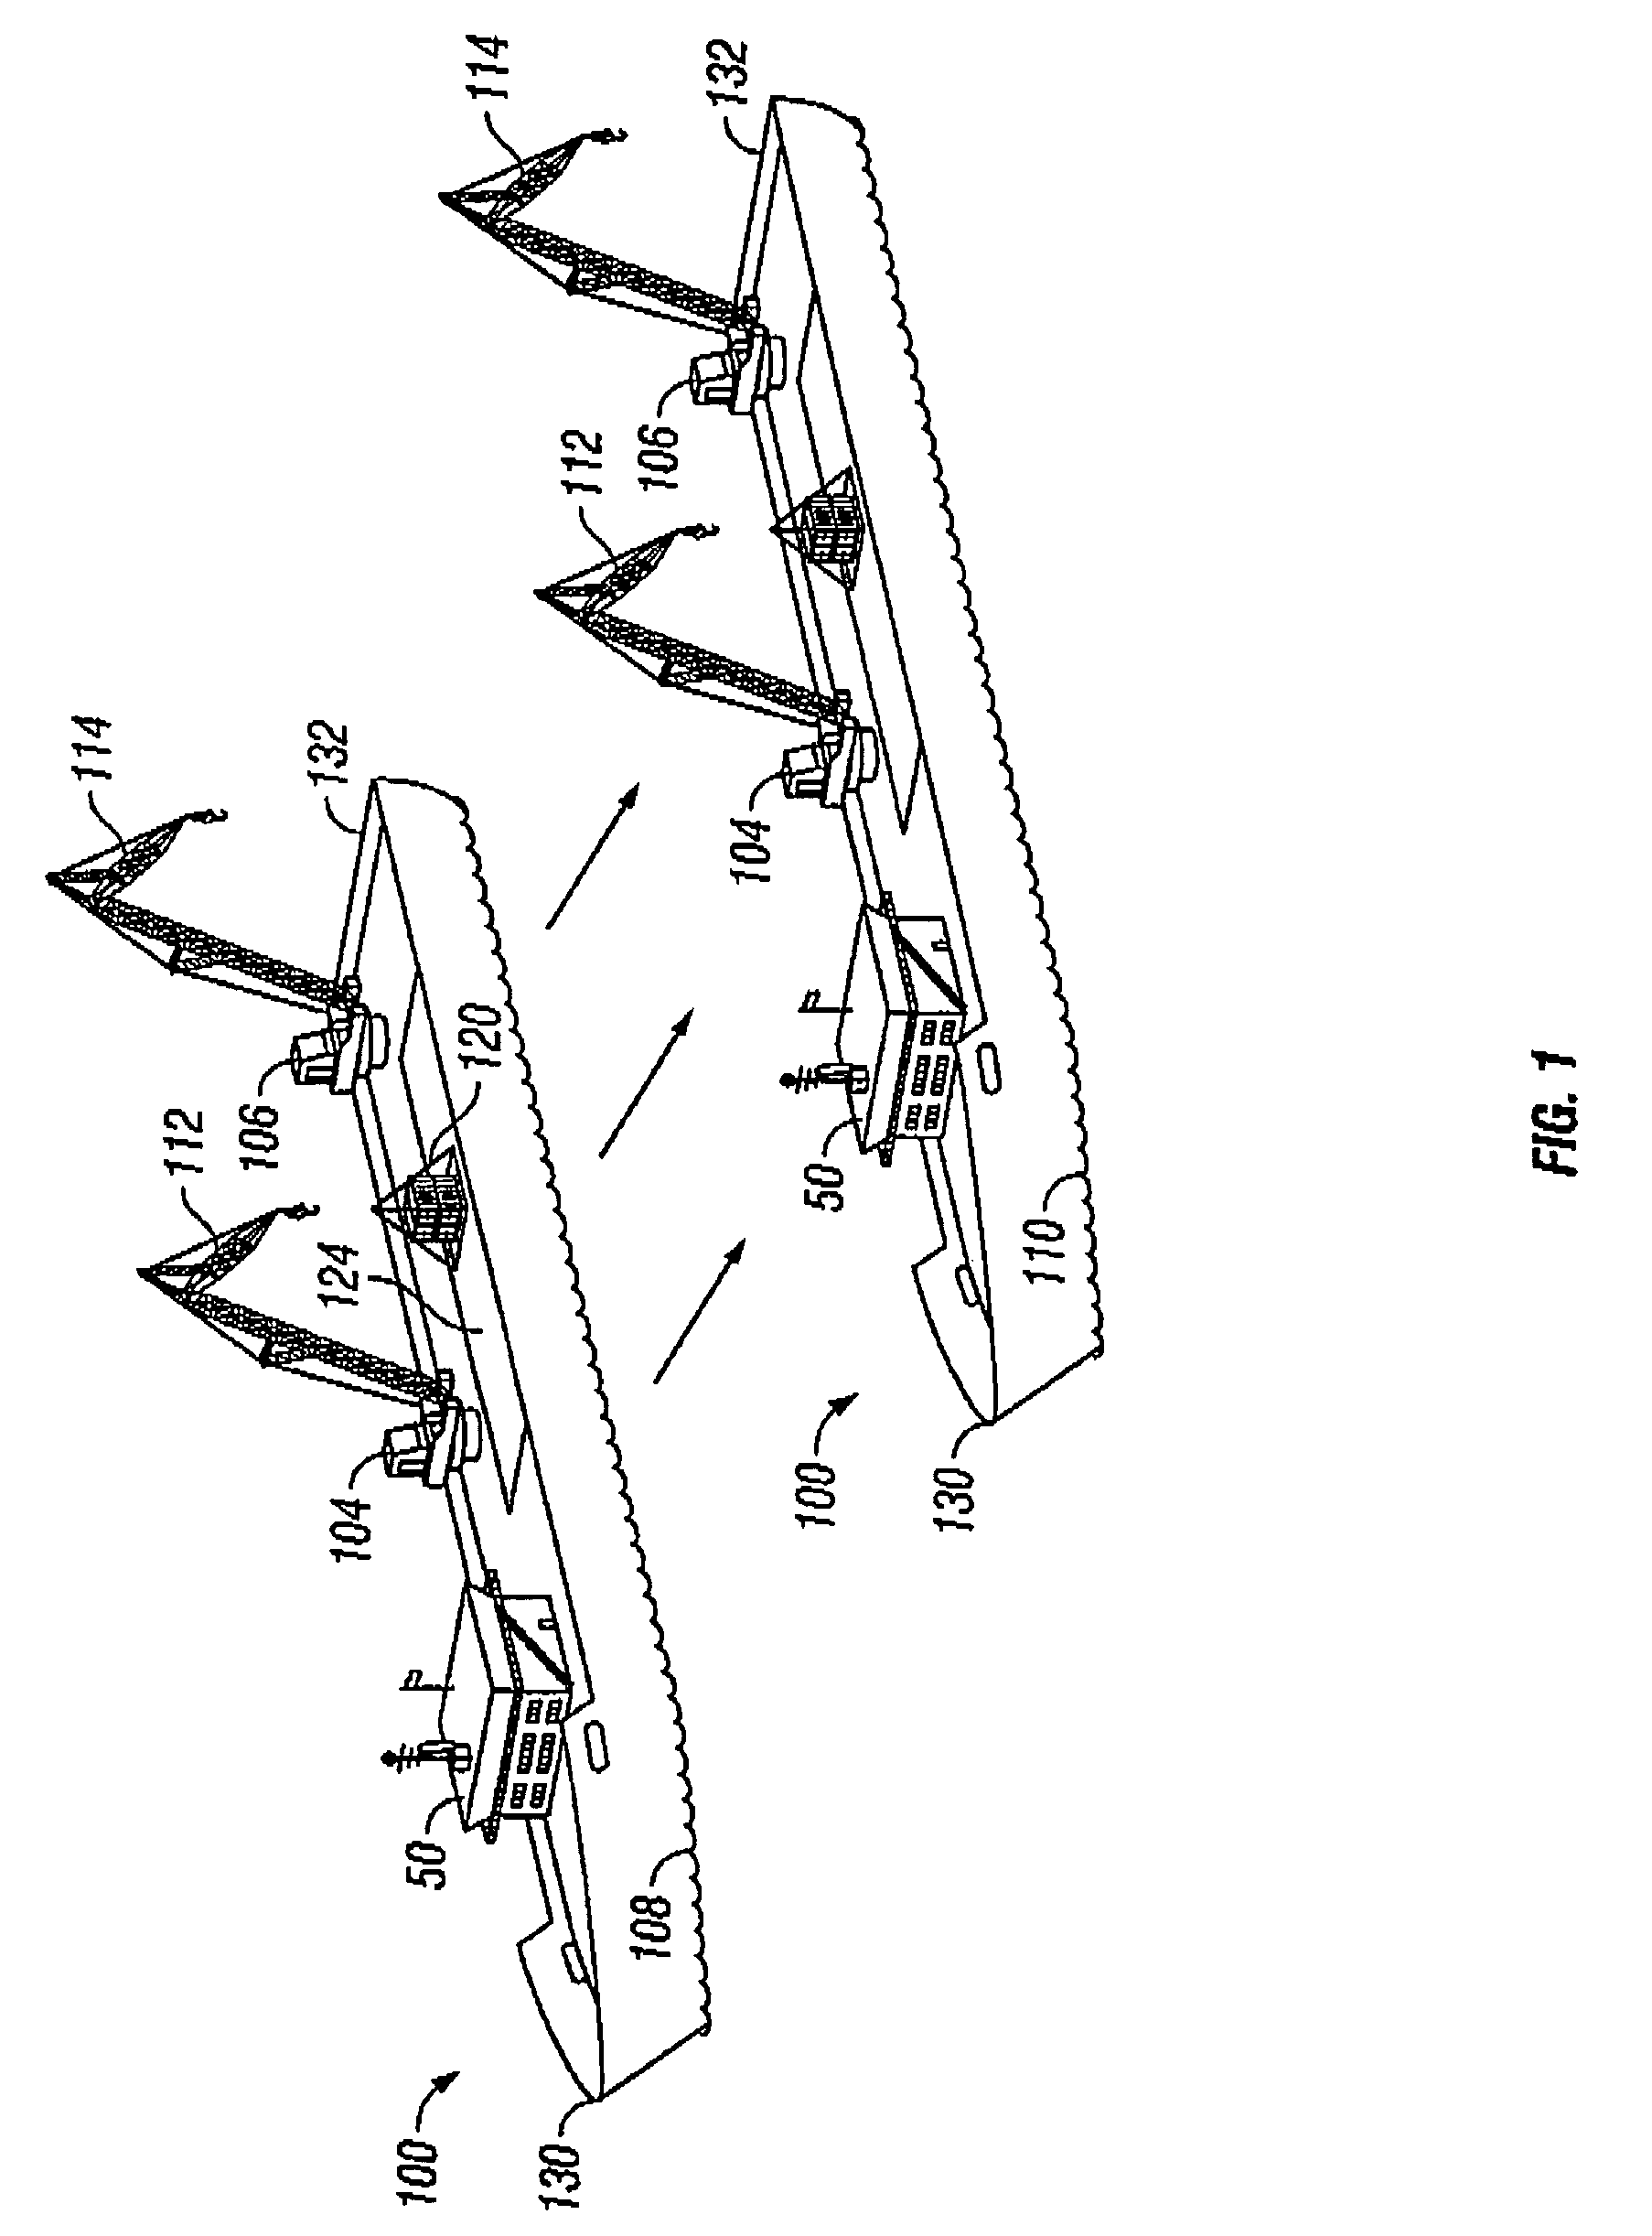 Method for lifting and transporting a heavy load using a fly-jib